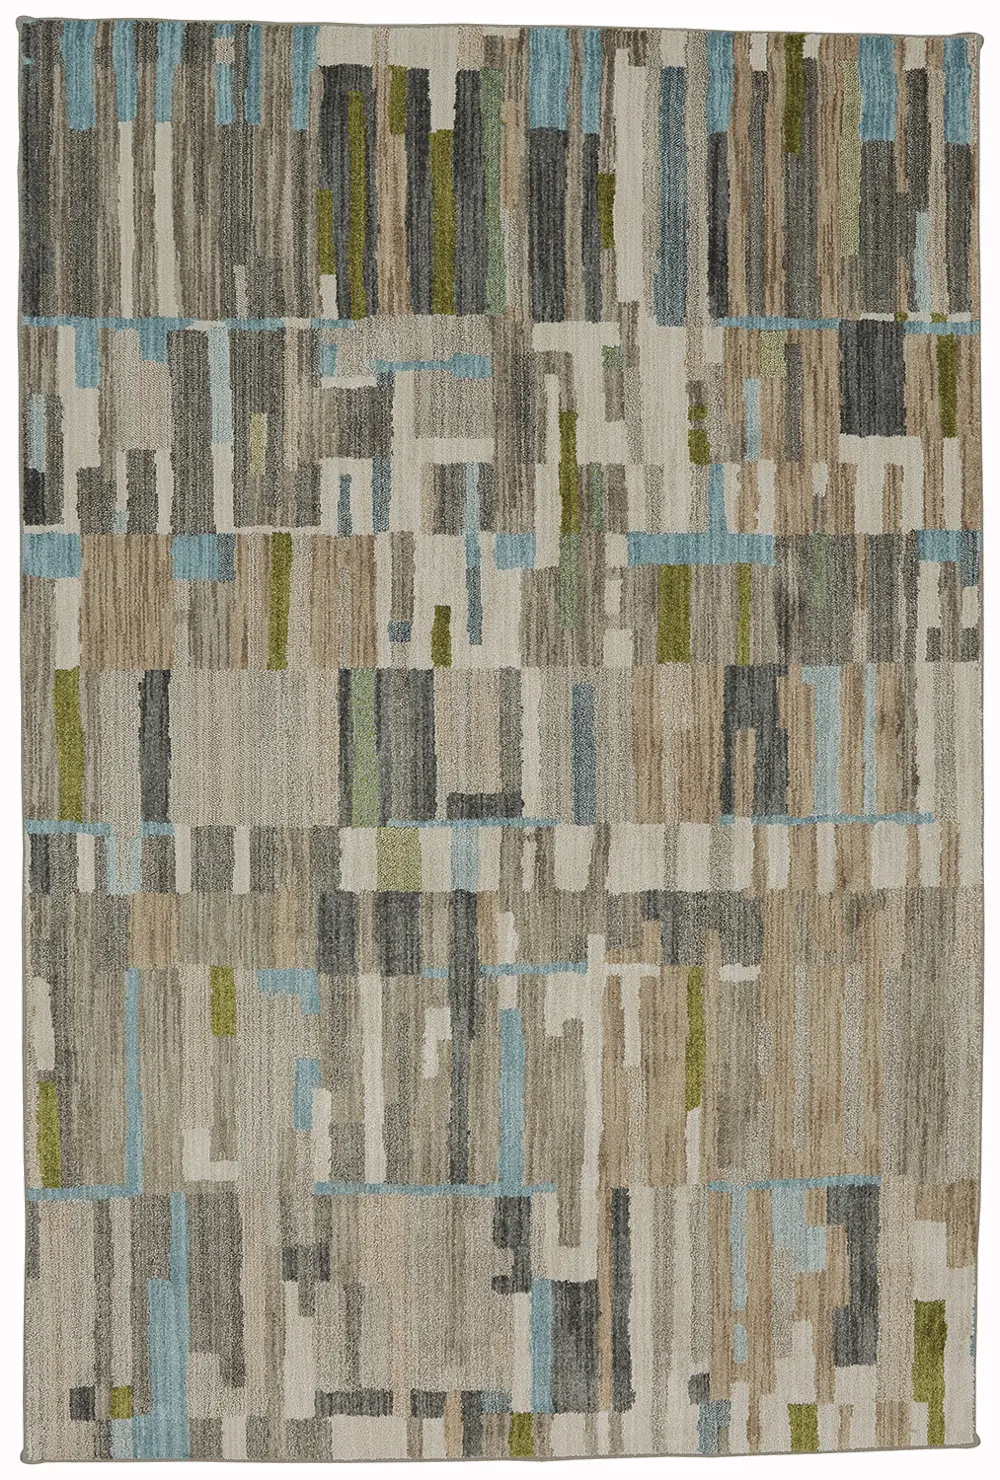 91017-50137/8X11/MUS 8 x 11 Large Bacchus Brown, Gray, Green, and Blue Rug - Muse-1